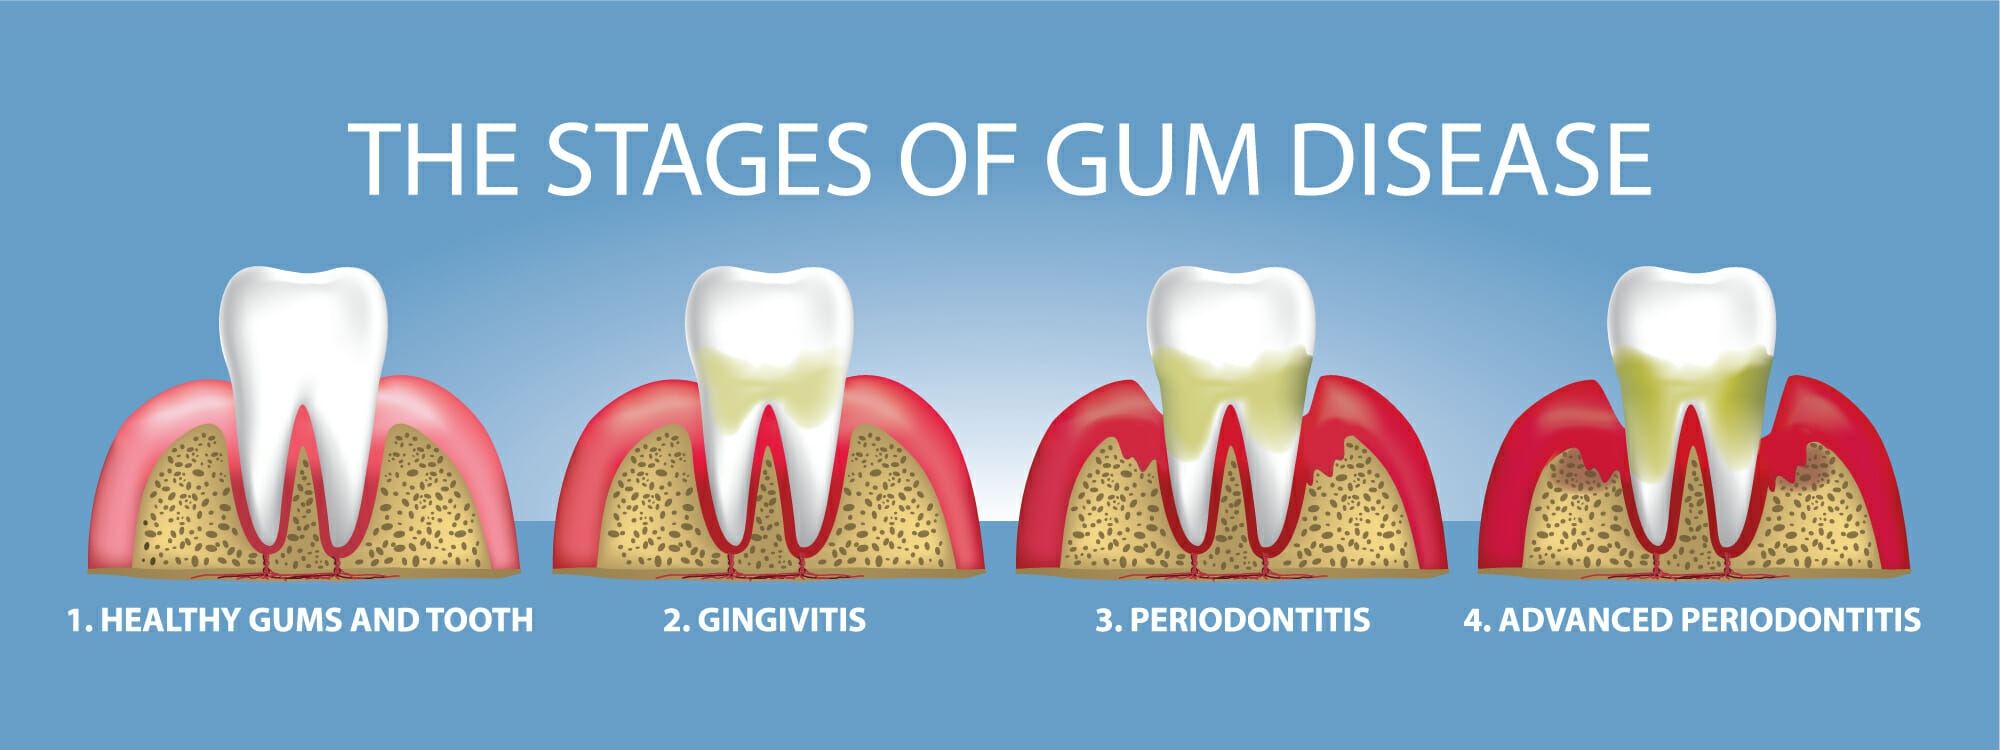 The stages of gun disease. 1. Healthy gums and tooth. 2. Gingivitis. 3. Periodontitis. 4. Advanced Periodontitis.